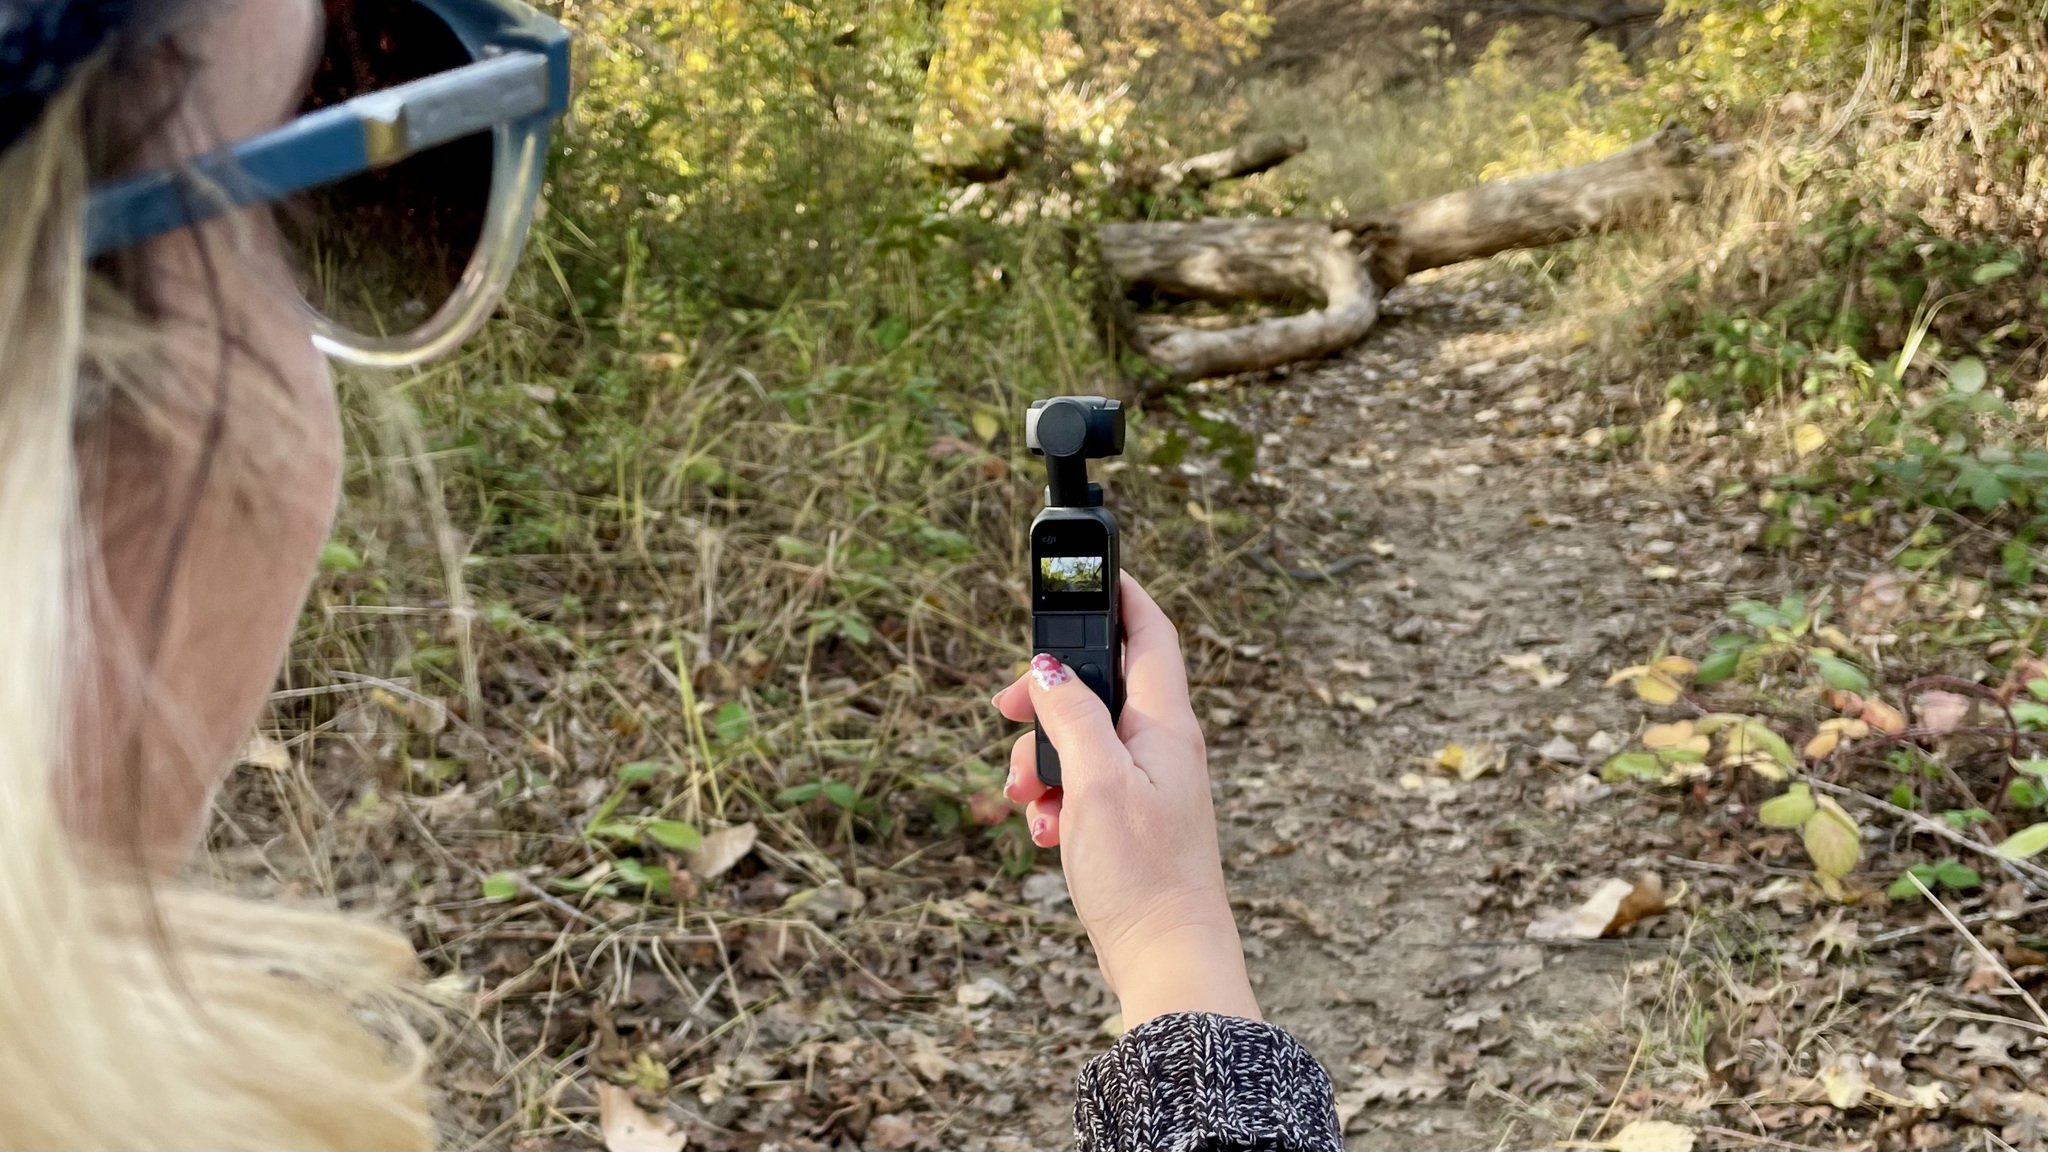 DJI Pocket 2 review: Tiniest pro-quality camera ever | iMore